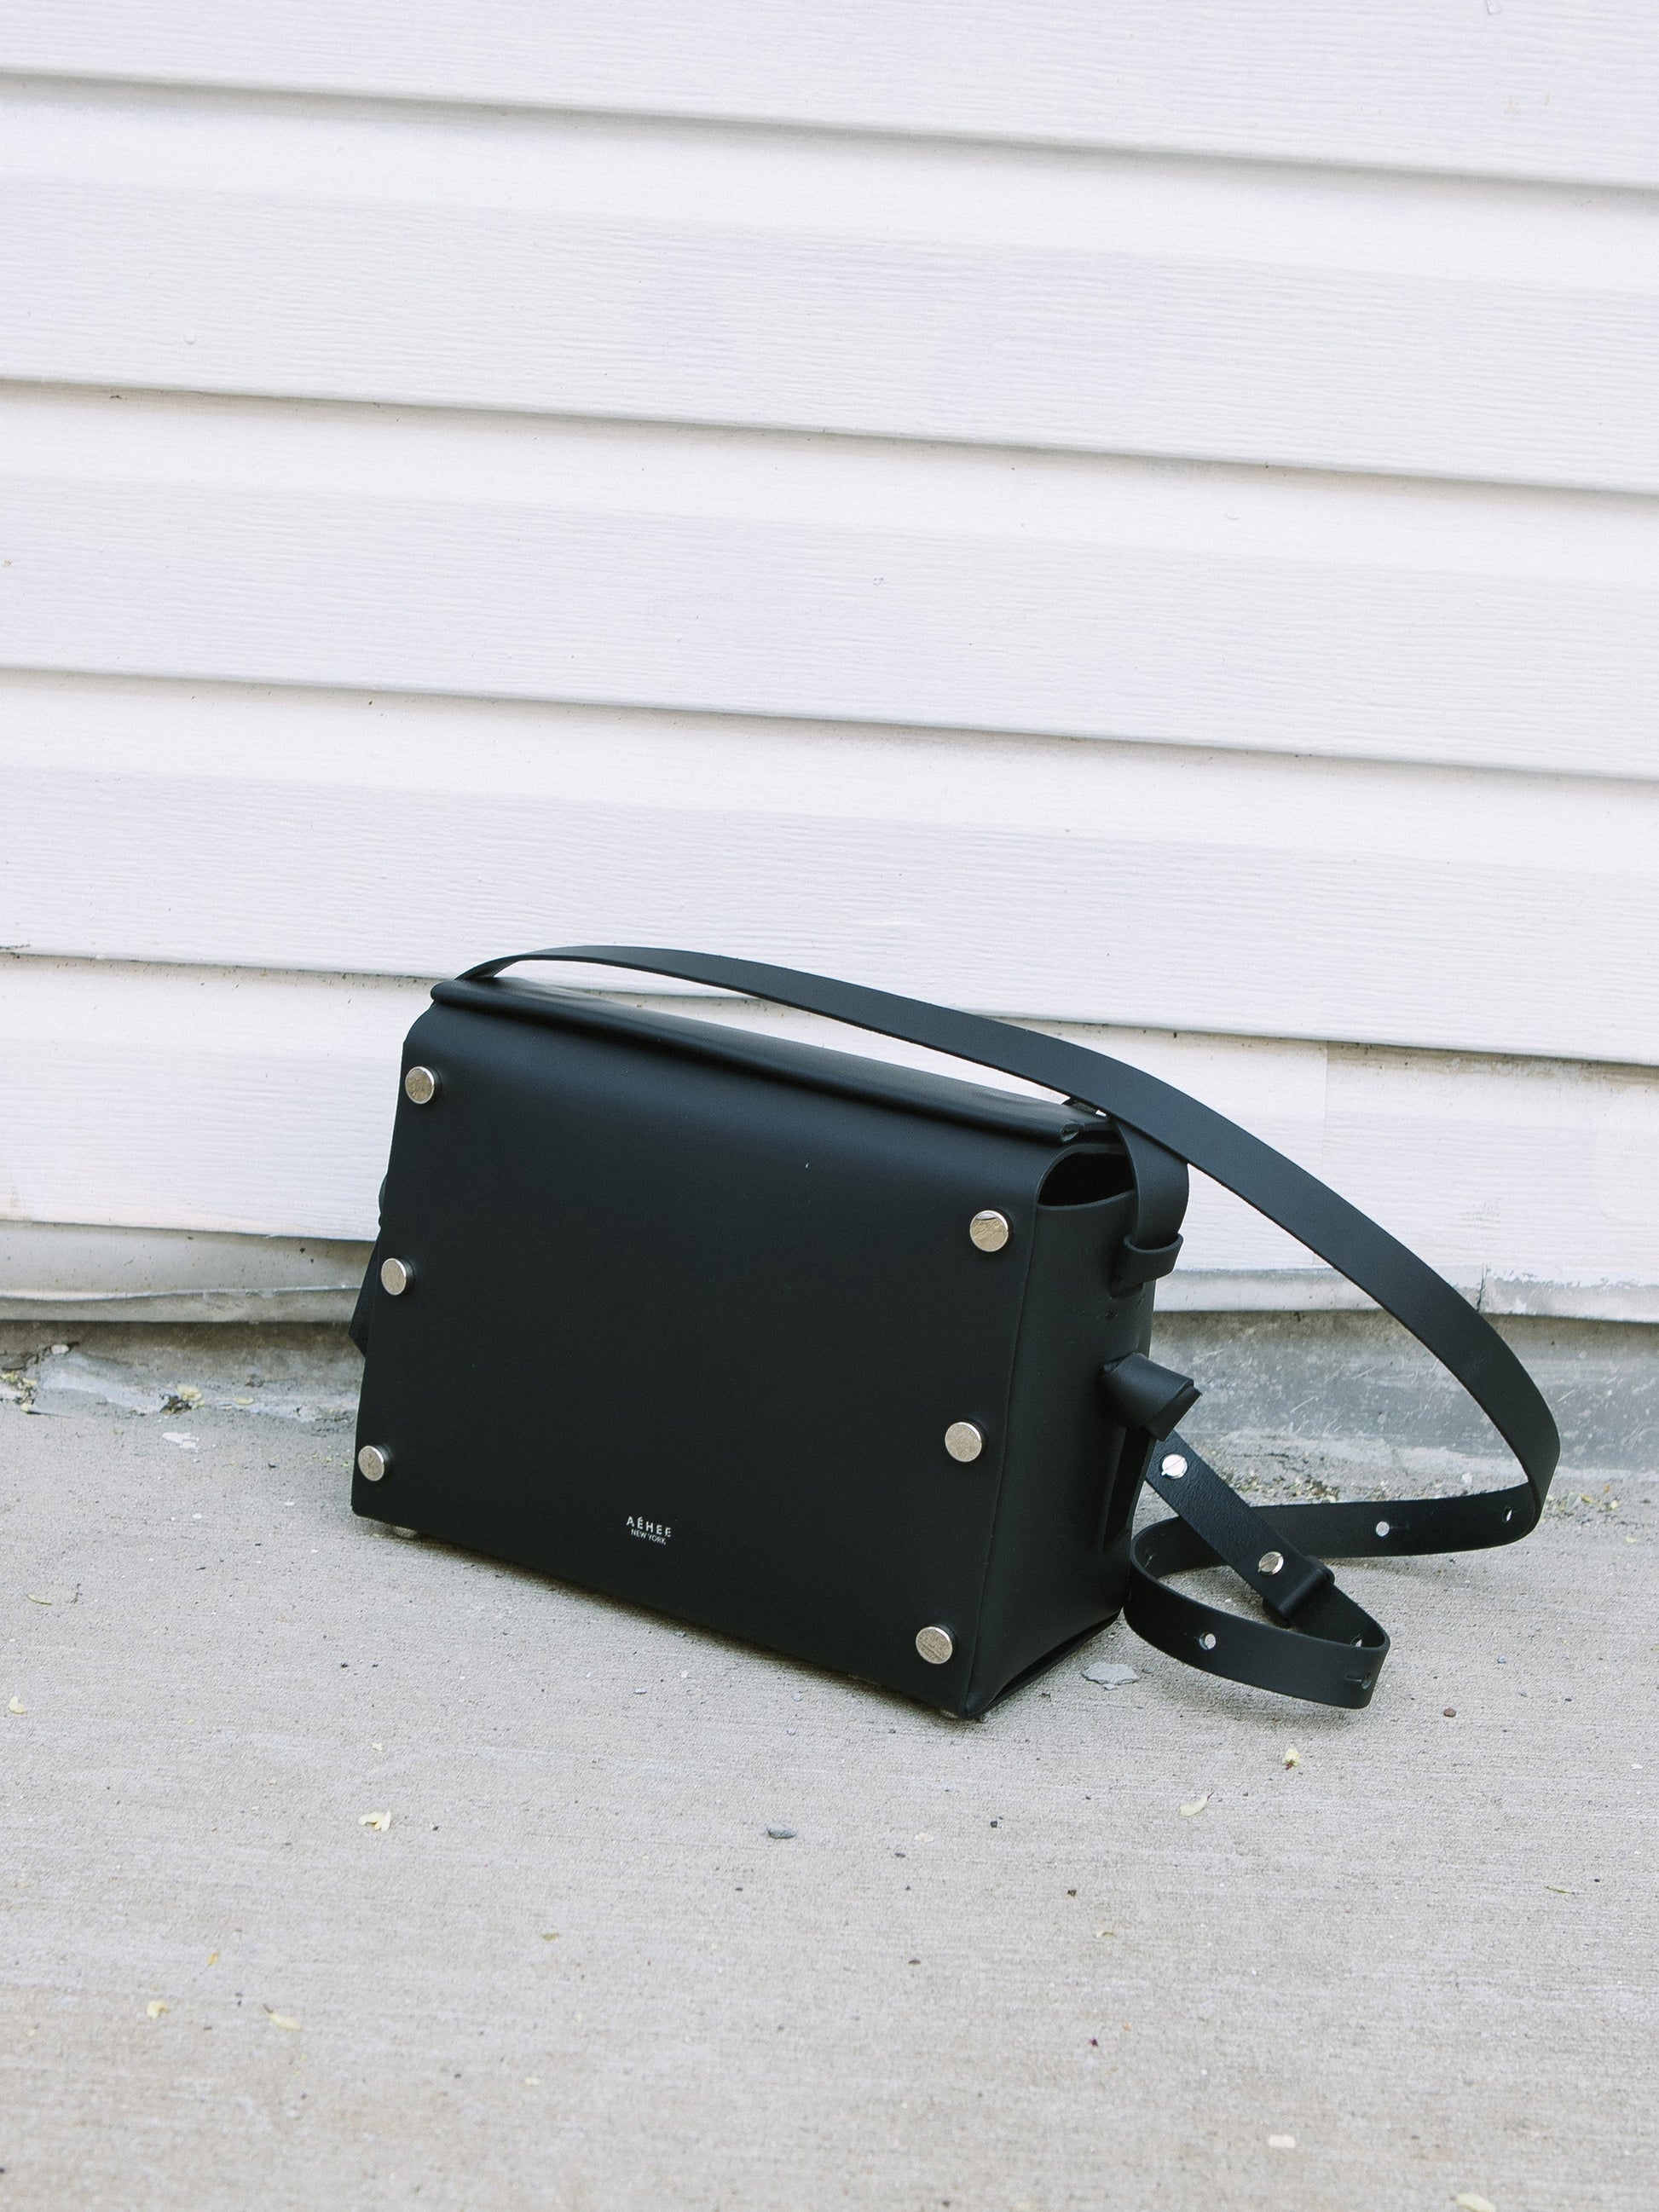 Chic black crossbody bag and shoulder bag with adjustable strap crafted from Italian vegetable tanned leather for a minimal yet sophisticated look.